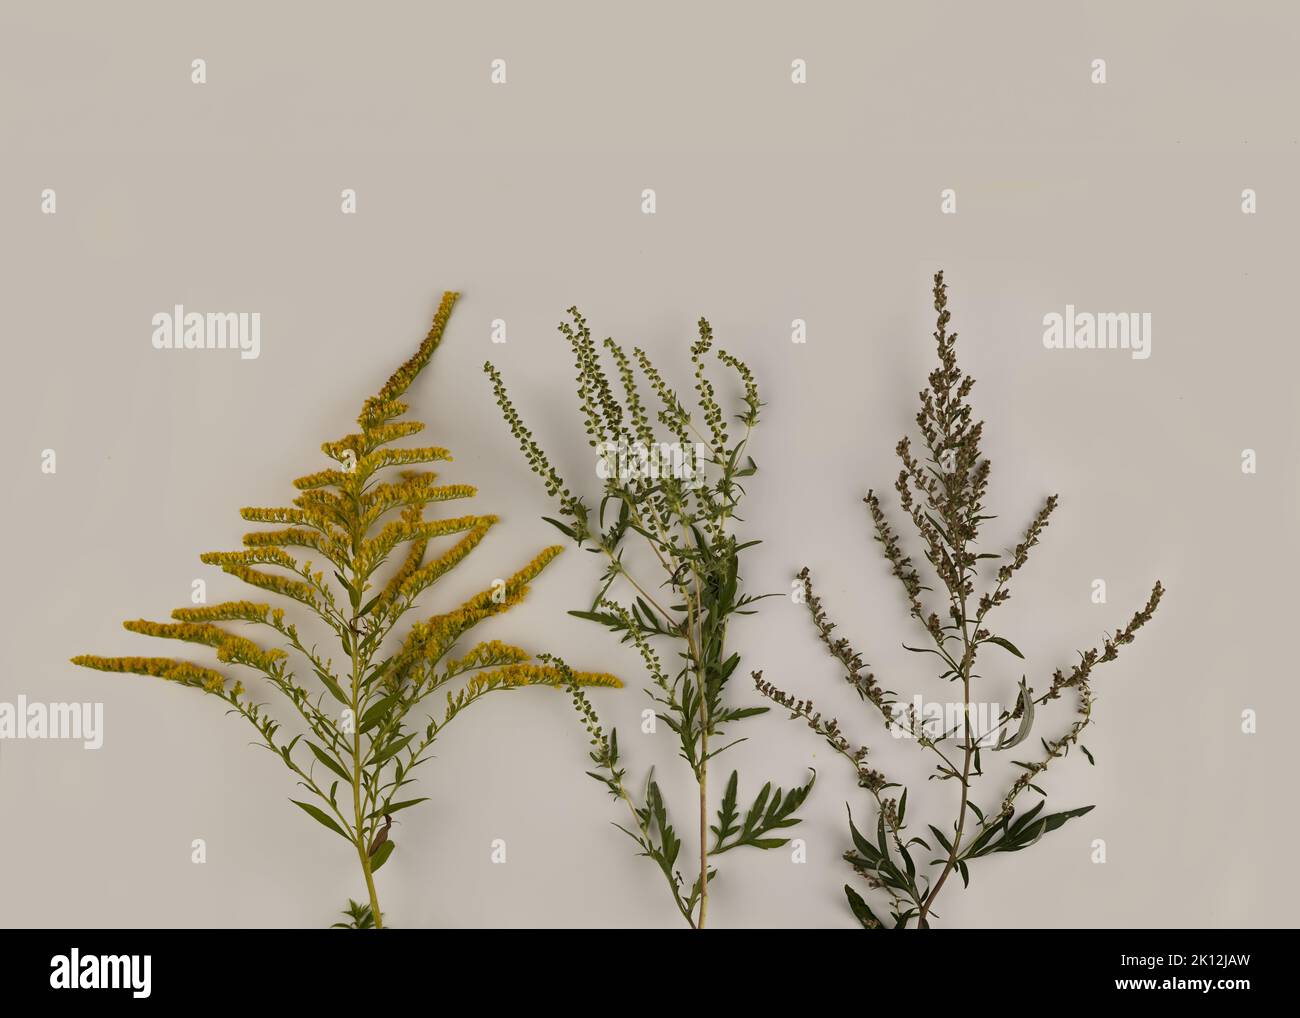 Comparison of ragweed, goldenrod and wormwood flowers. Blooming Ambrosia artemisiifolia is a dangerous allergenic plants, weed bushes pollen causes al Stock Photo